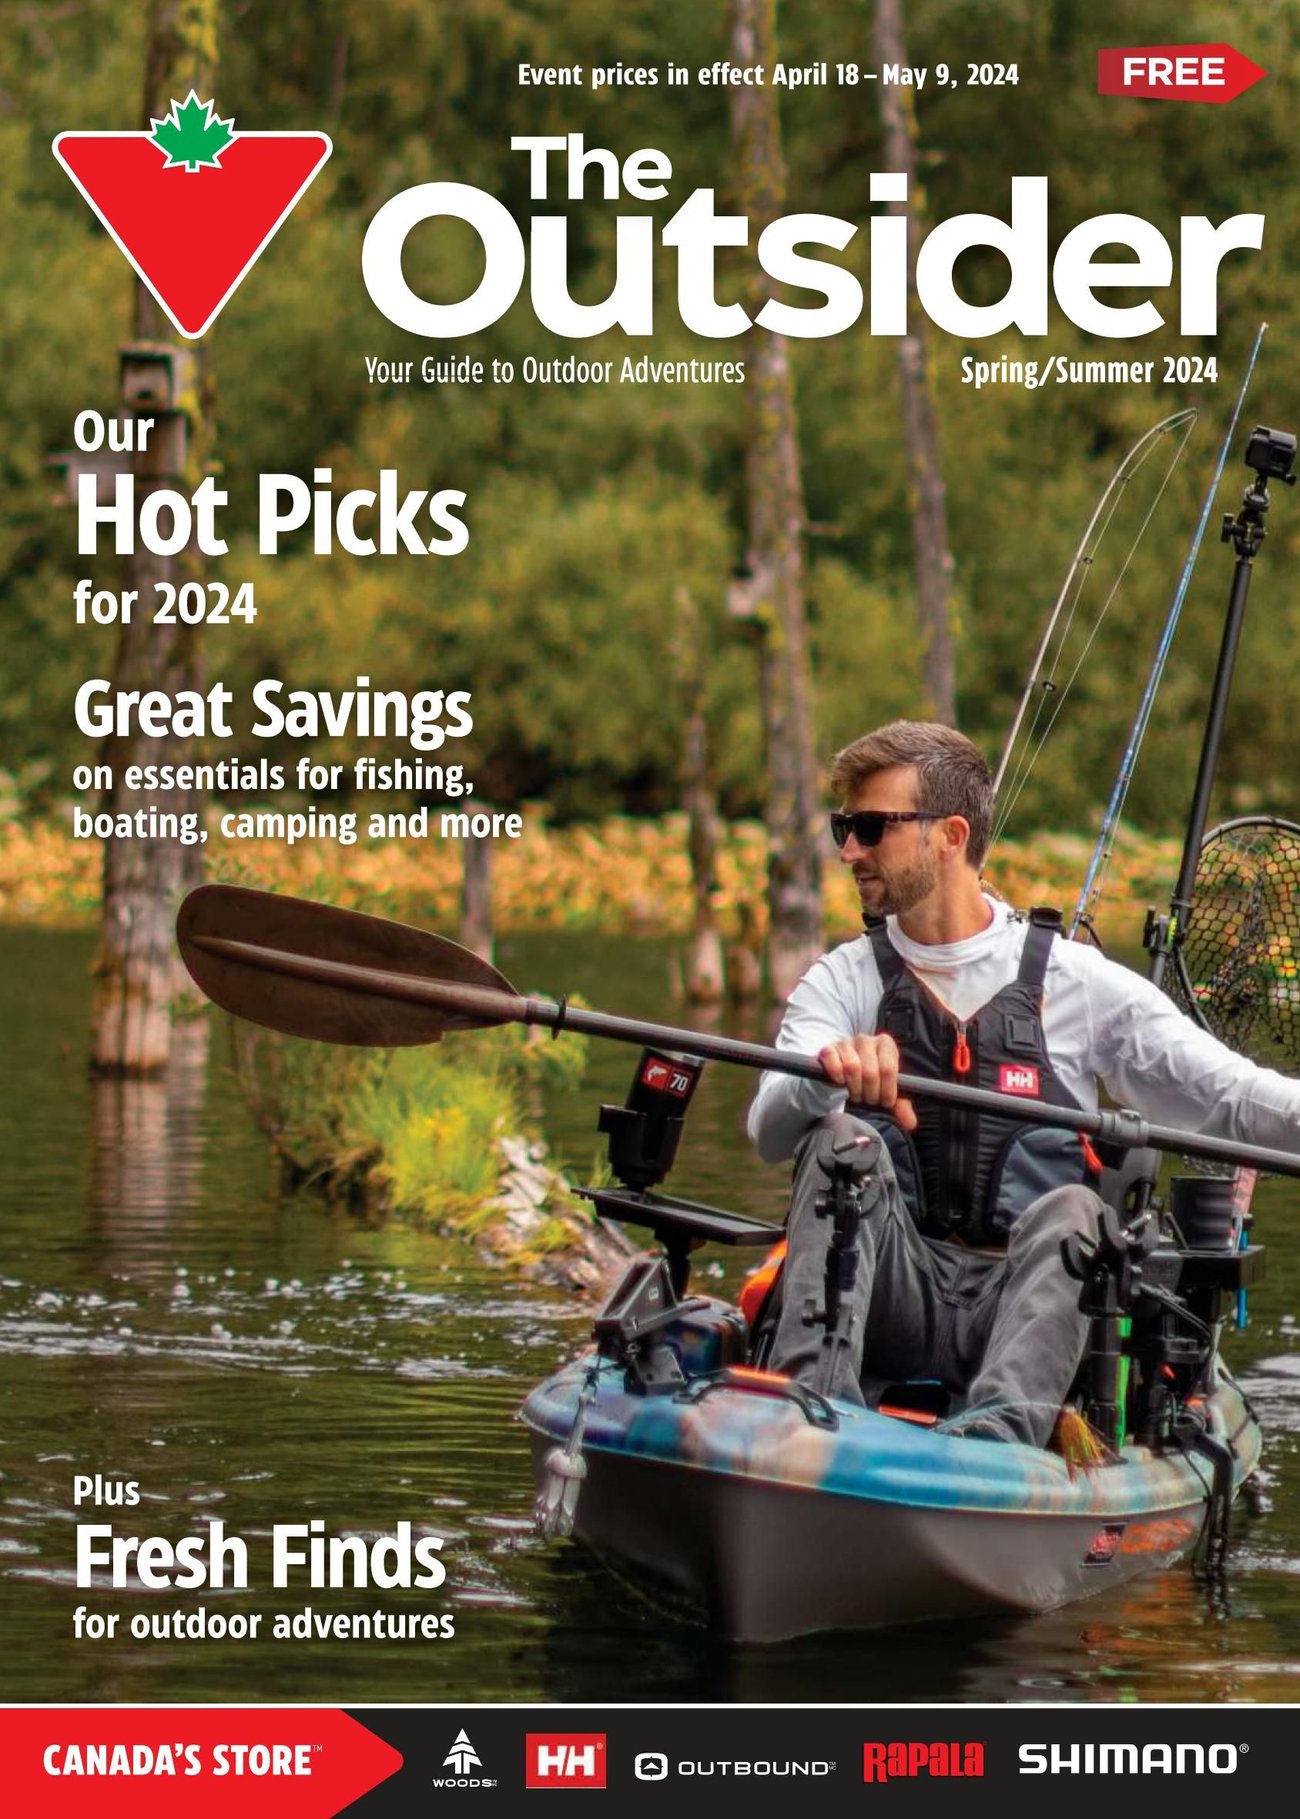 Canadian Tire - The Outsider - Page 1